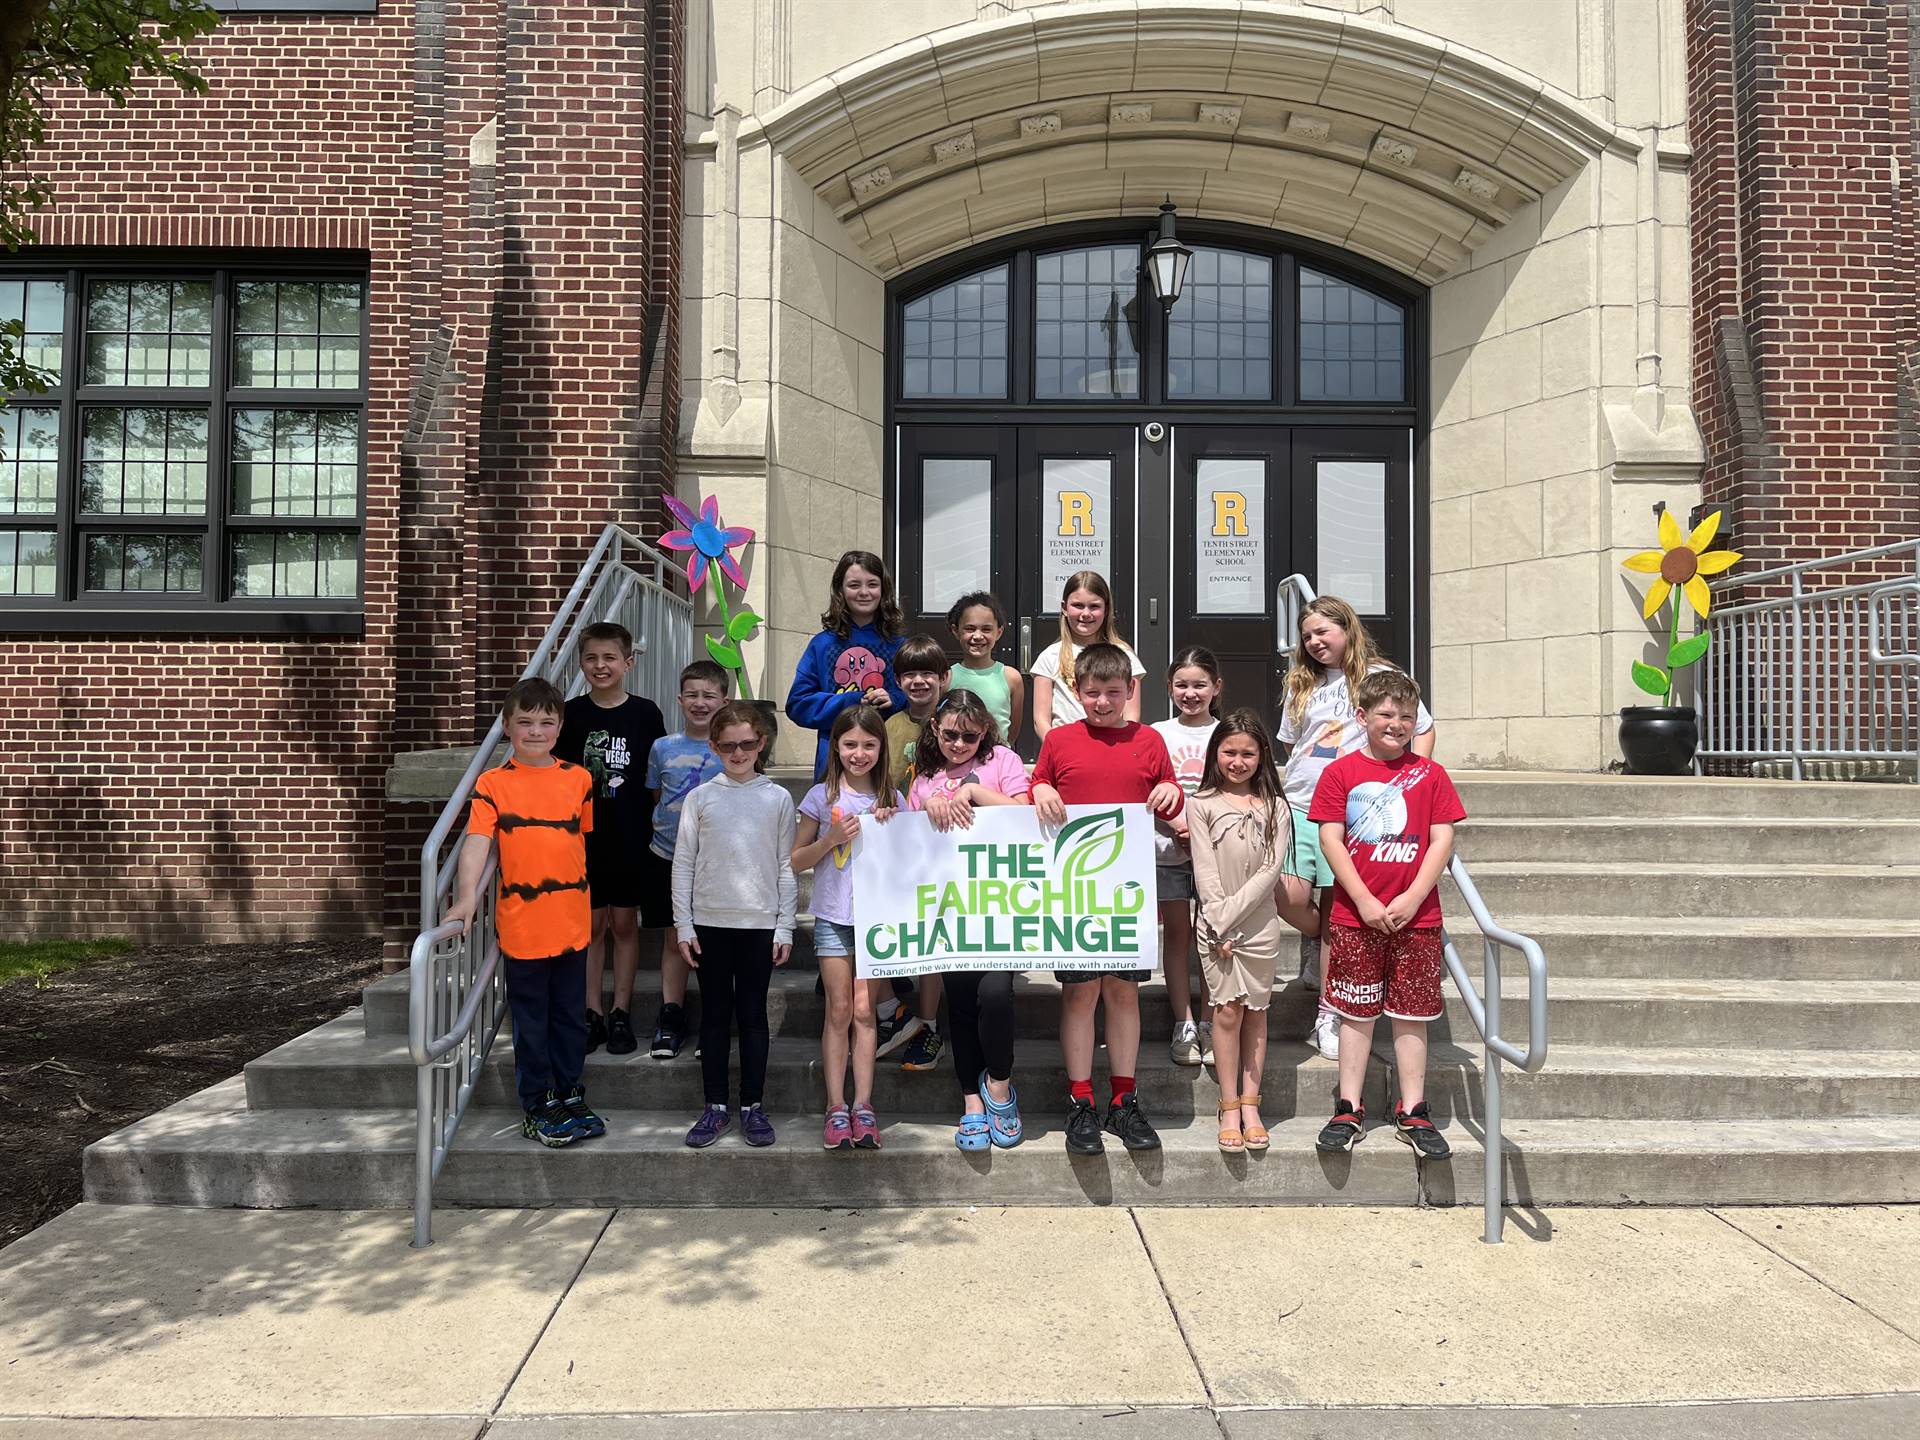 Tenth Street Third Graders pose for a photo after participating in the Fairchild Challenge.